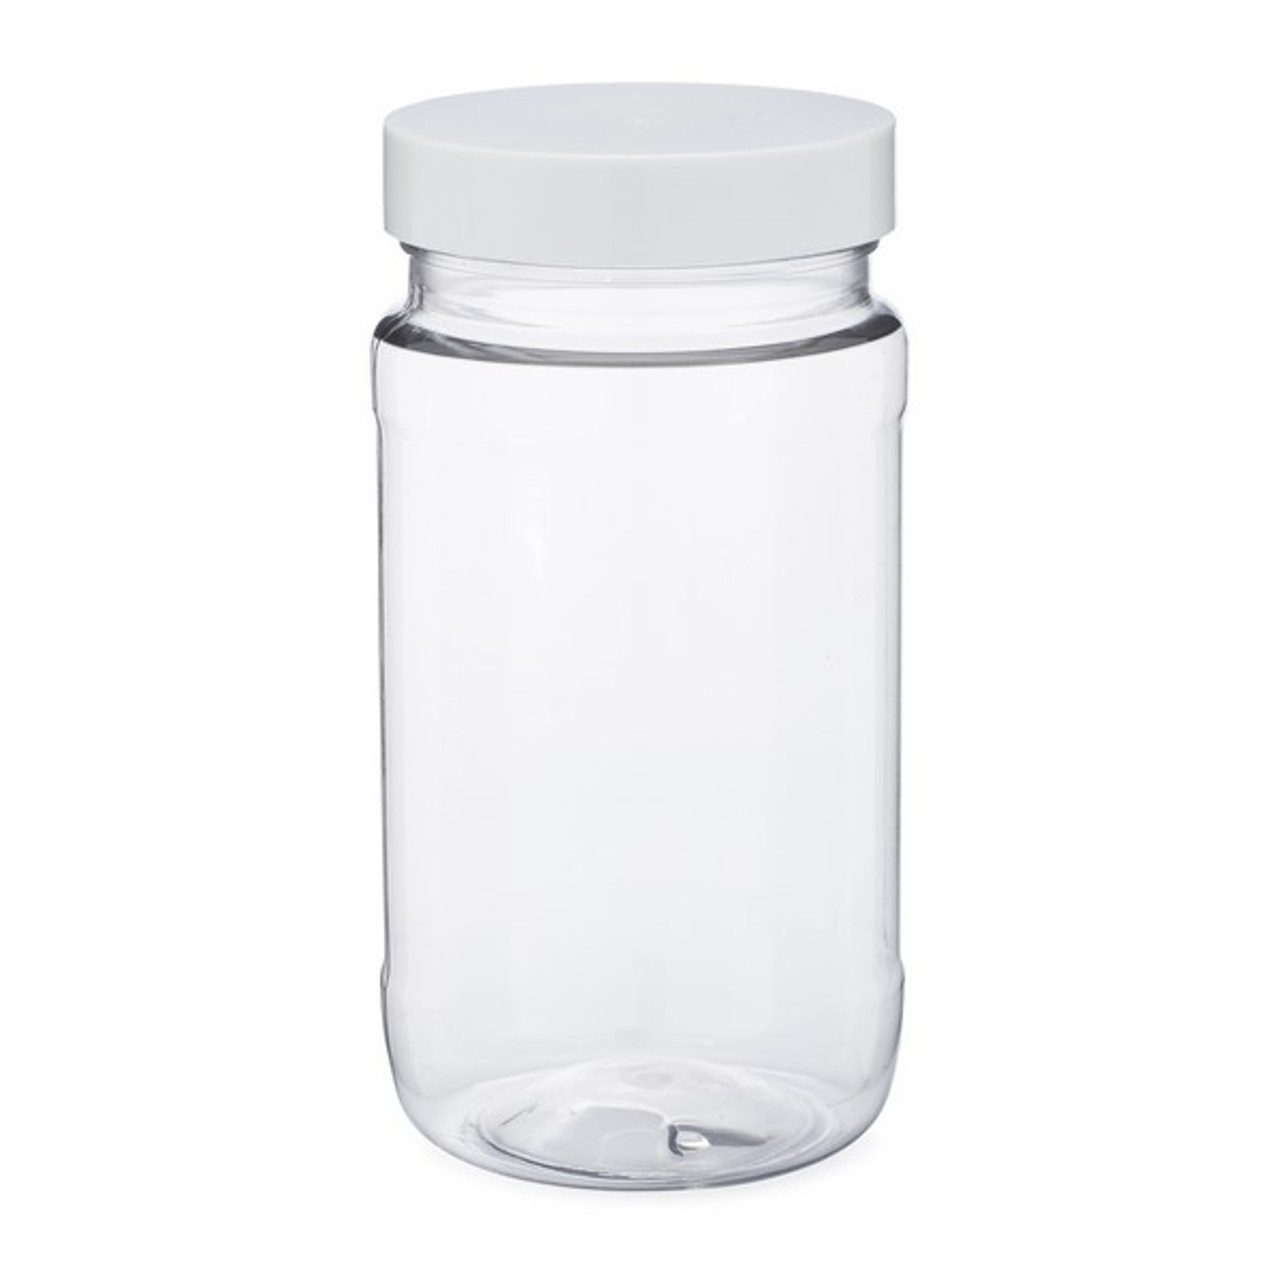 8 oz Clear Glass Wide Mouth Economy Jars (Bulk), Caps Not Included